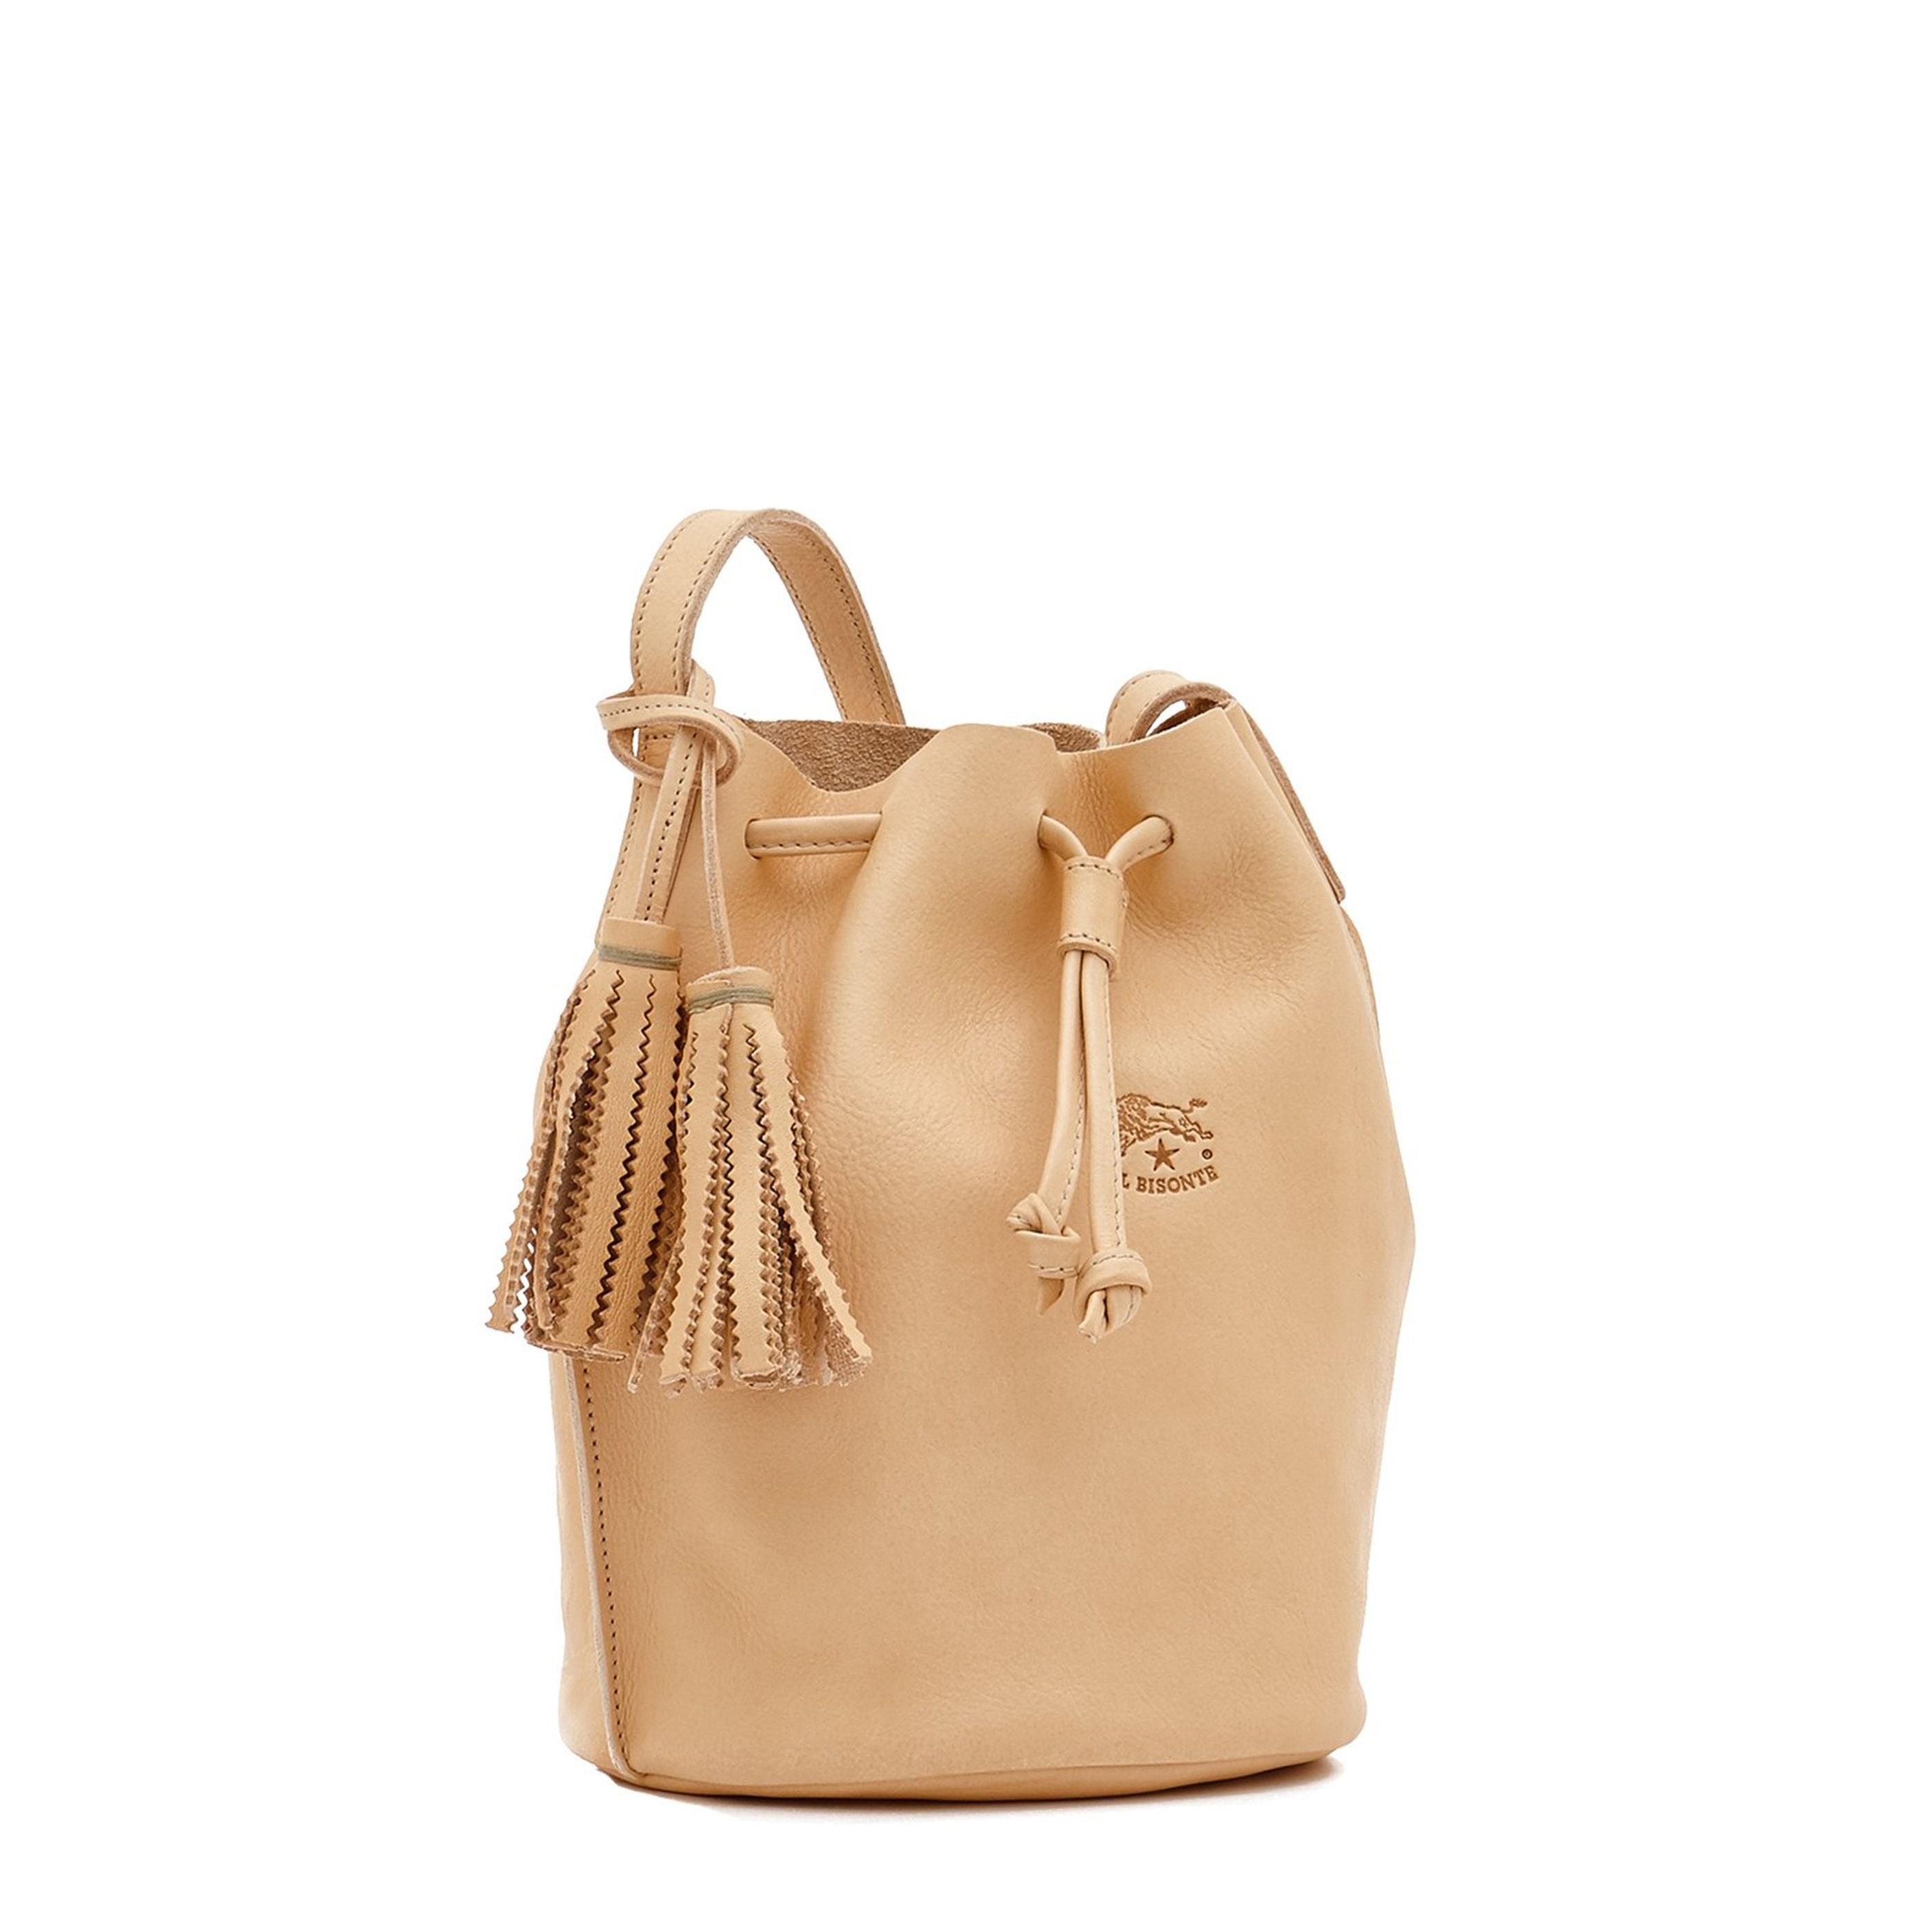 Silvia | Women's bucket bag in leather color natural